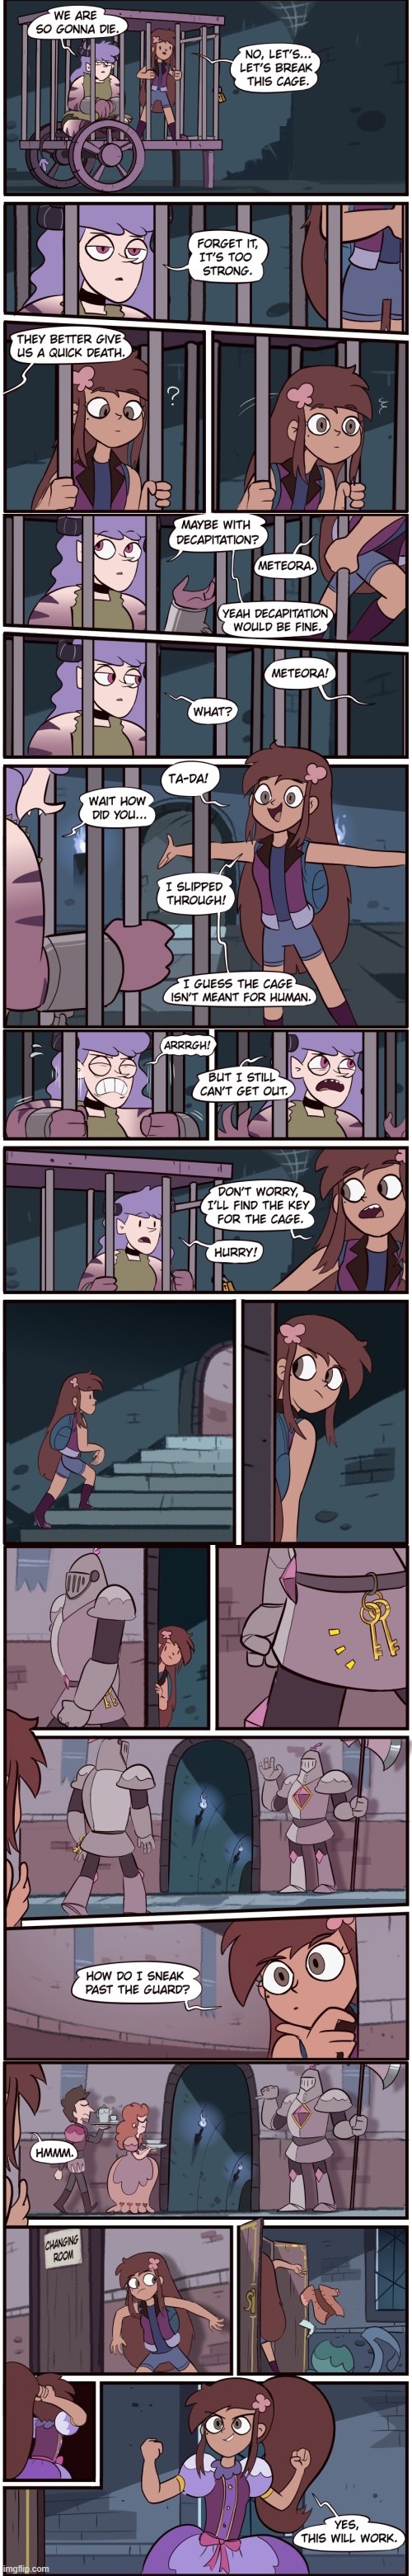 Echo Creek: A Tale of Two Butterflies: Chapter 3: Never say Neverzone (Part 6) | image tagged in morningmark,svtfoe,comics/cartoons,star vs the forces of evil,comics,memes | made w/ Imgflip meme maker